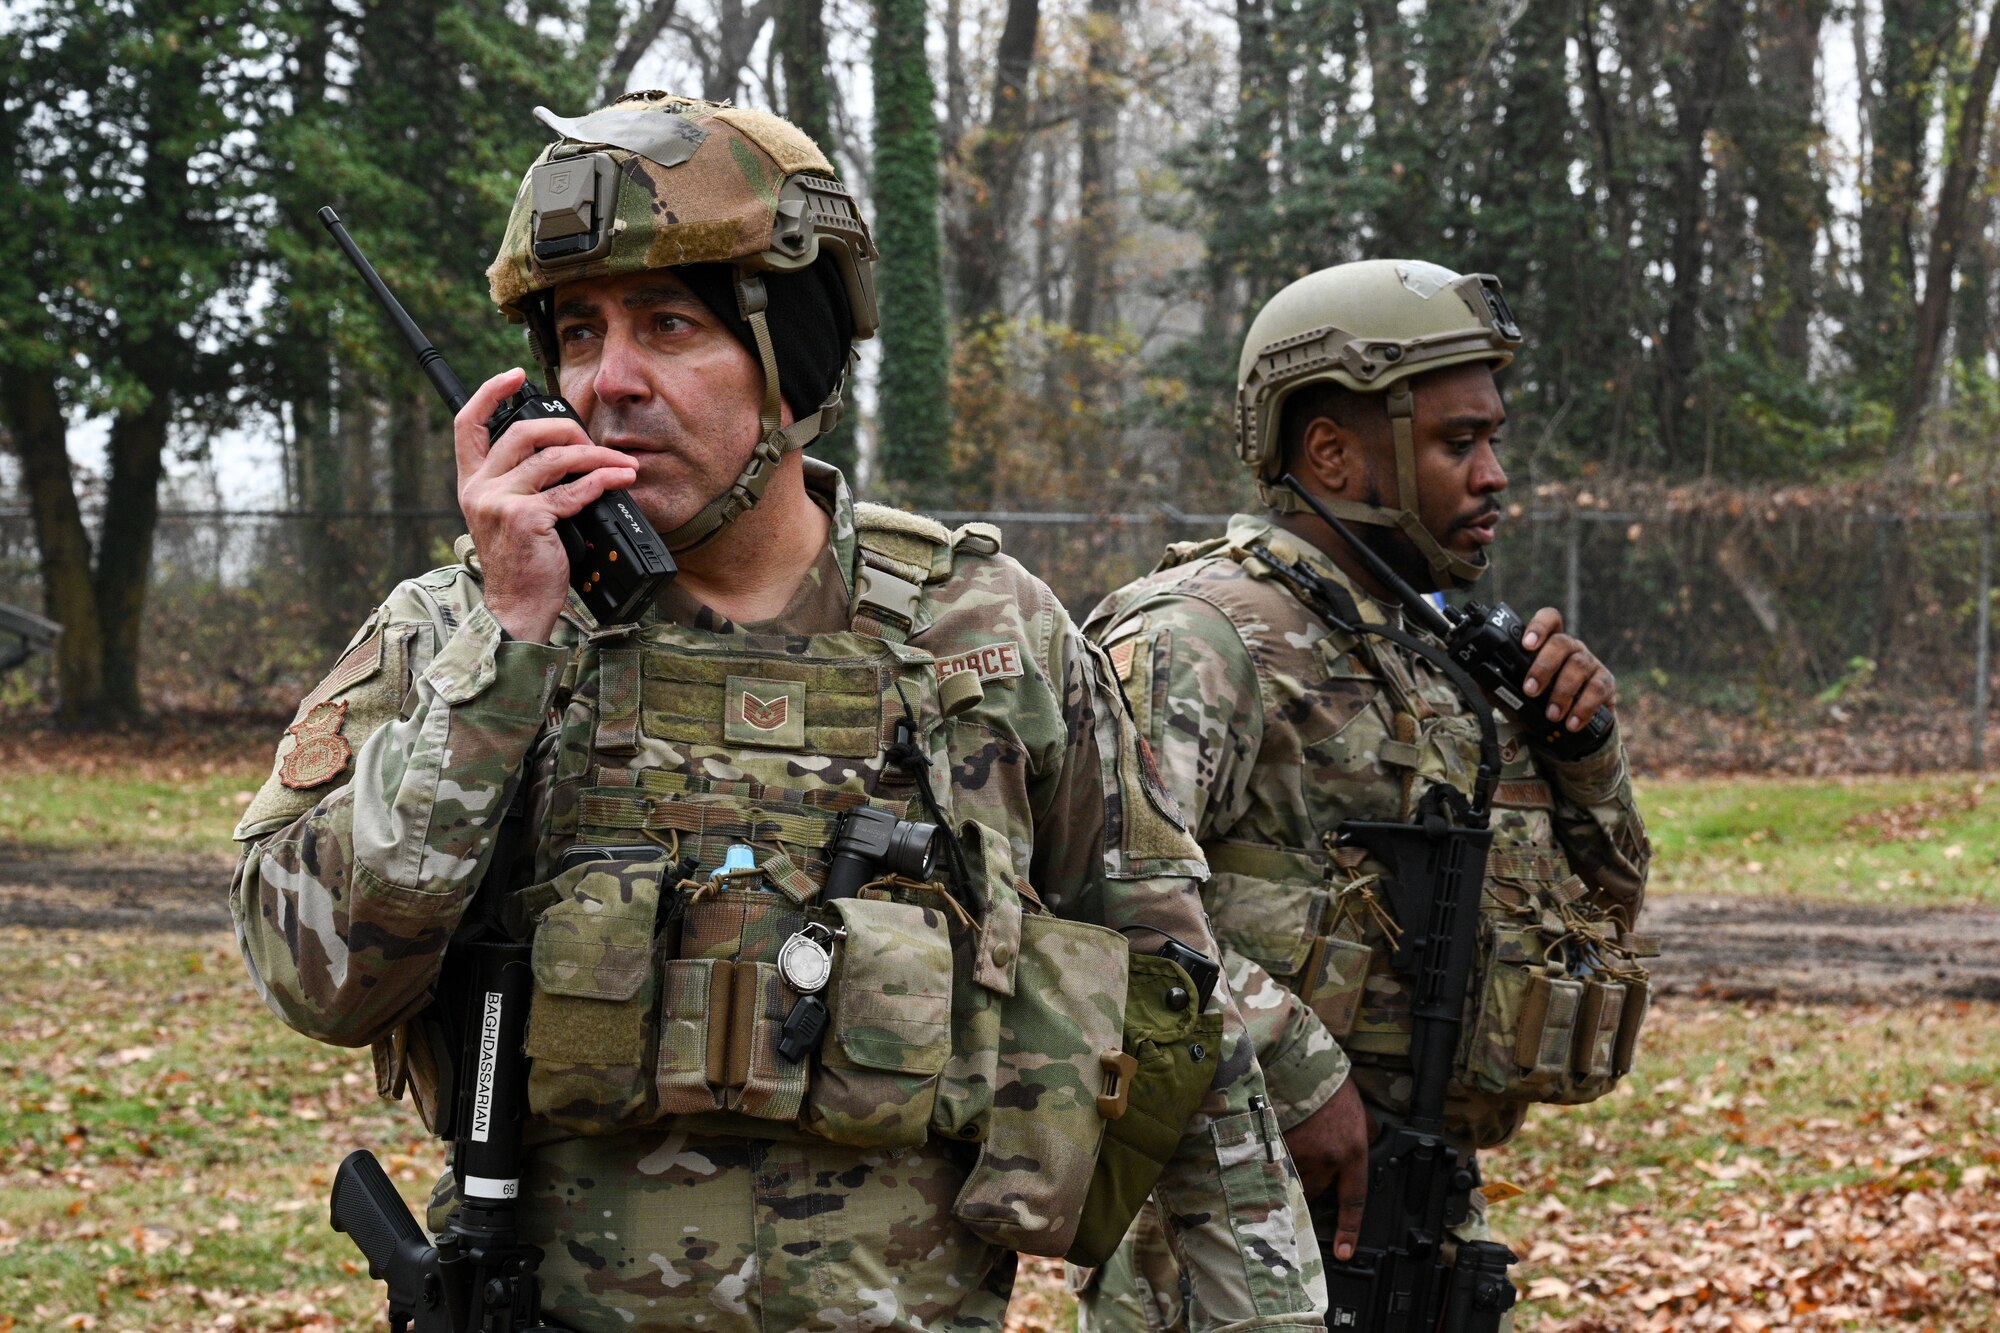 Maryland Air National Guard Tech. Sgt. Edmond Baghdassarian and Staff Sgt. Stefond Johnson, 175th Security Forces Squadron, establish communications during Operation Frosty Strike at Martin State Air National Guard Base, Middle River, Maryland, Dec. 2, 2023.